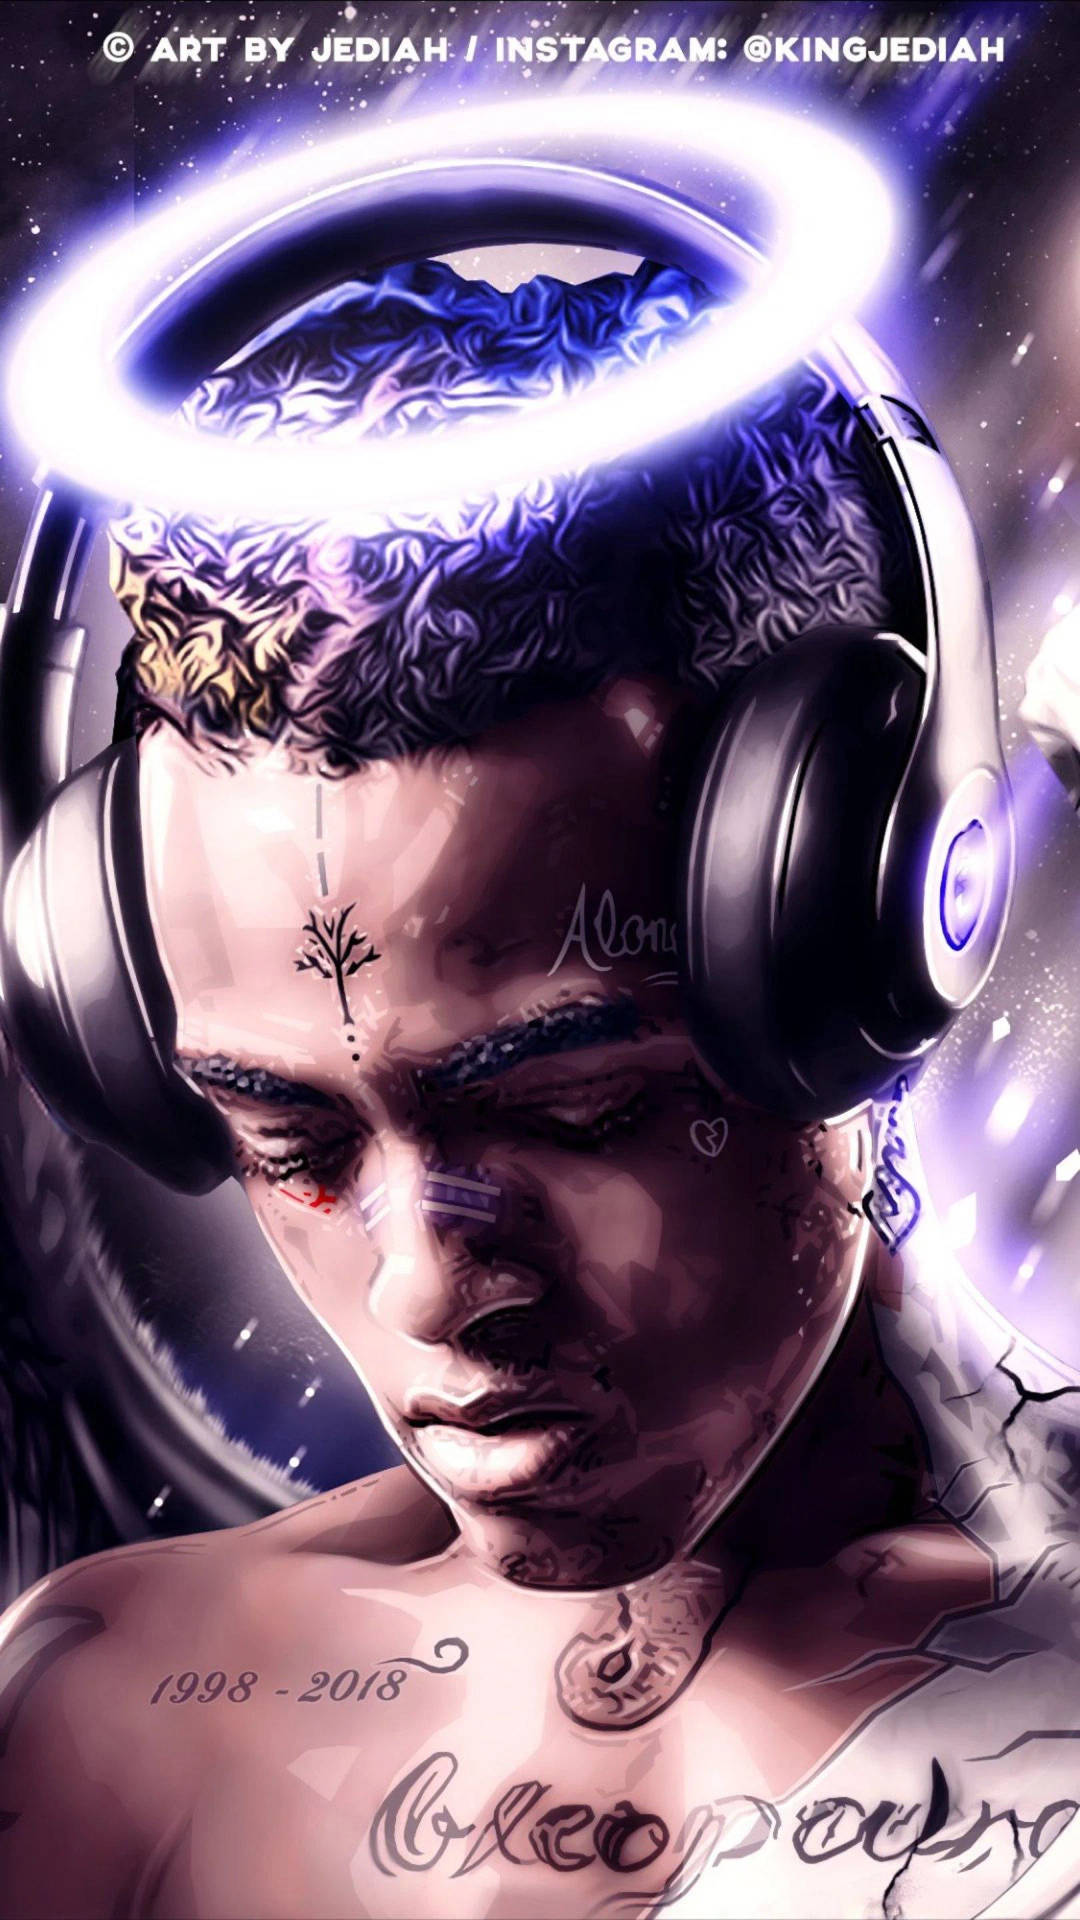 Cool Xxxtentacion With Halo And Headphones Wallpaper